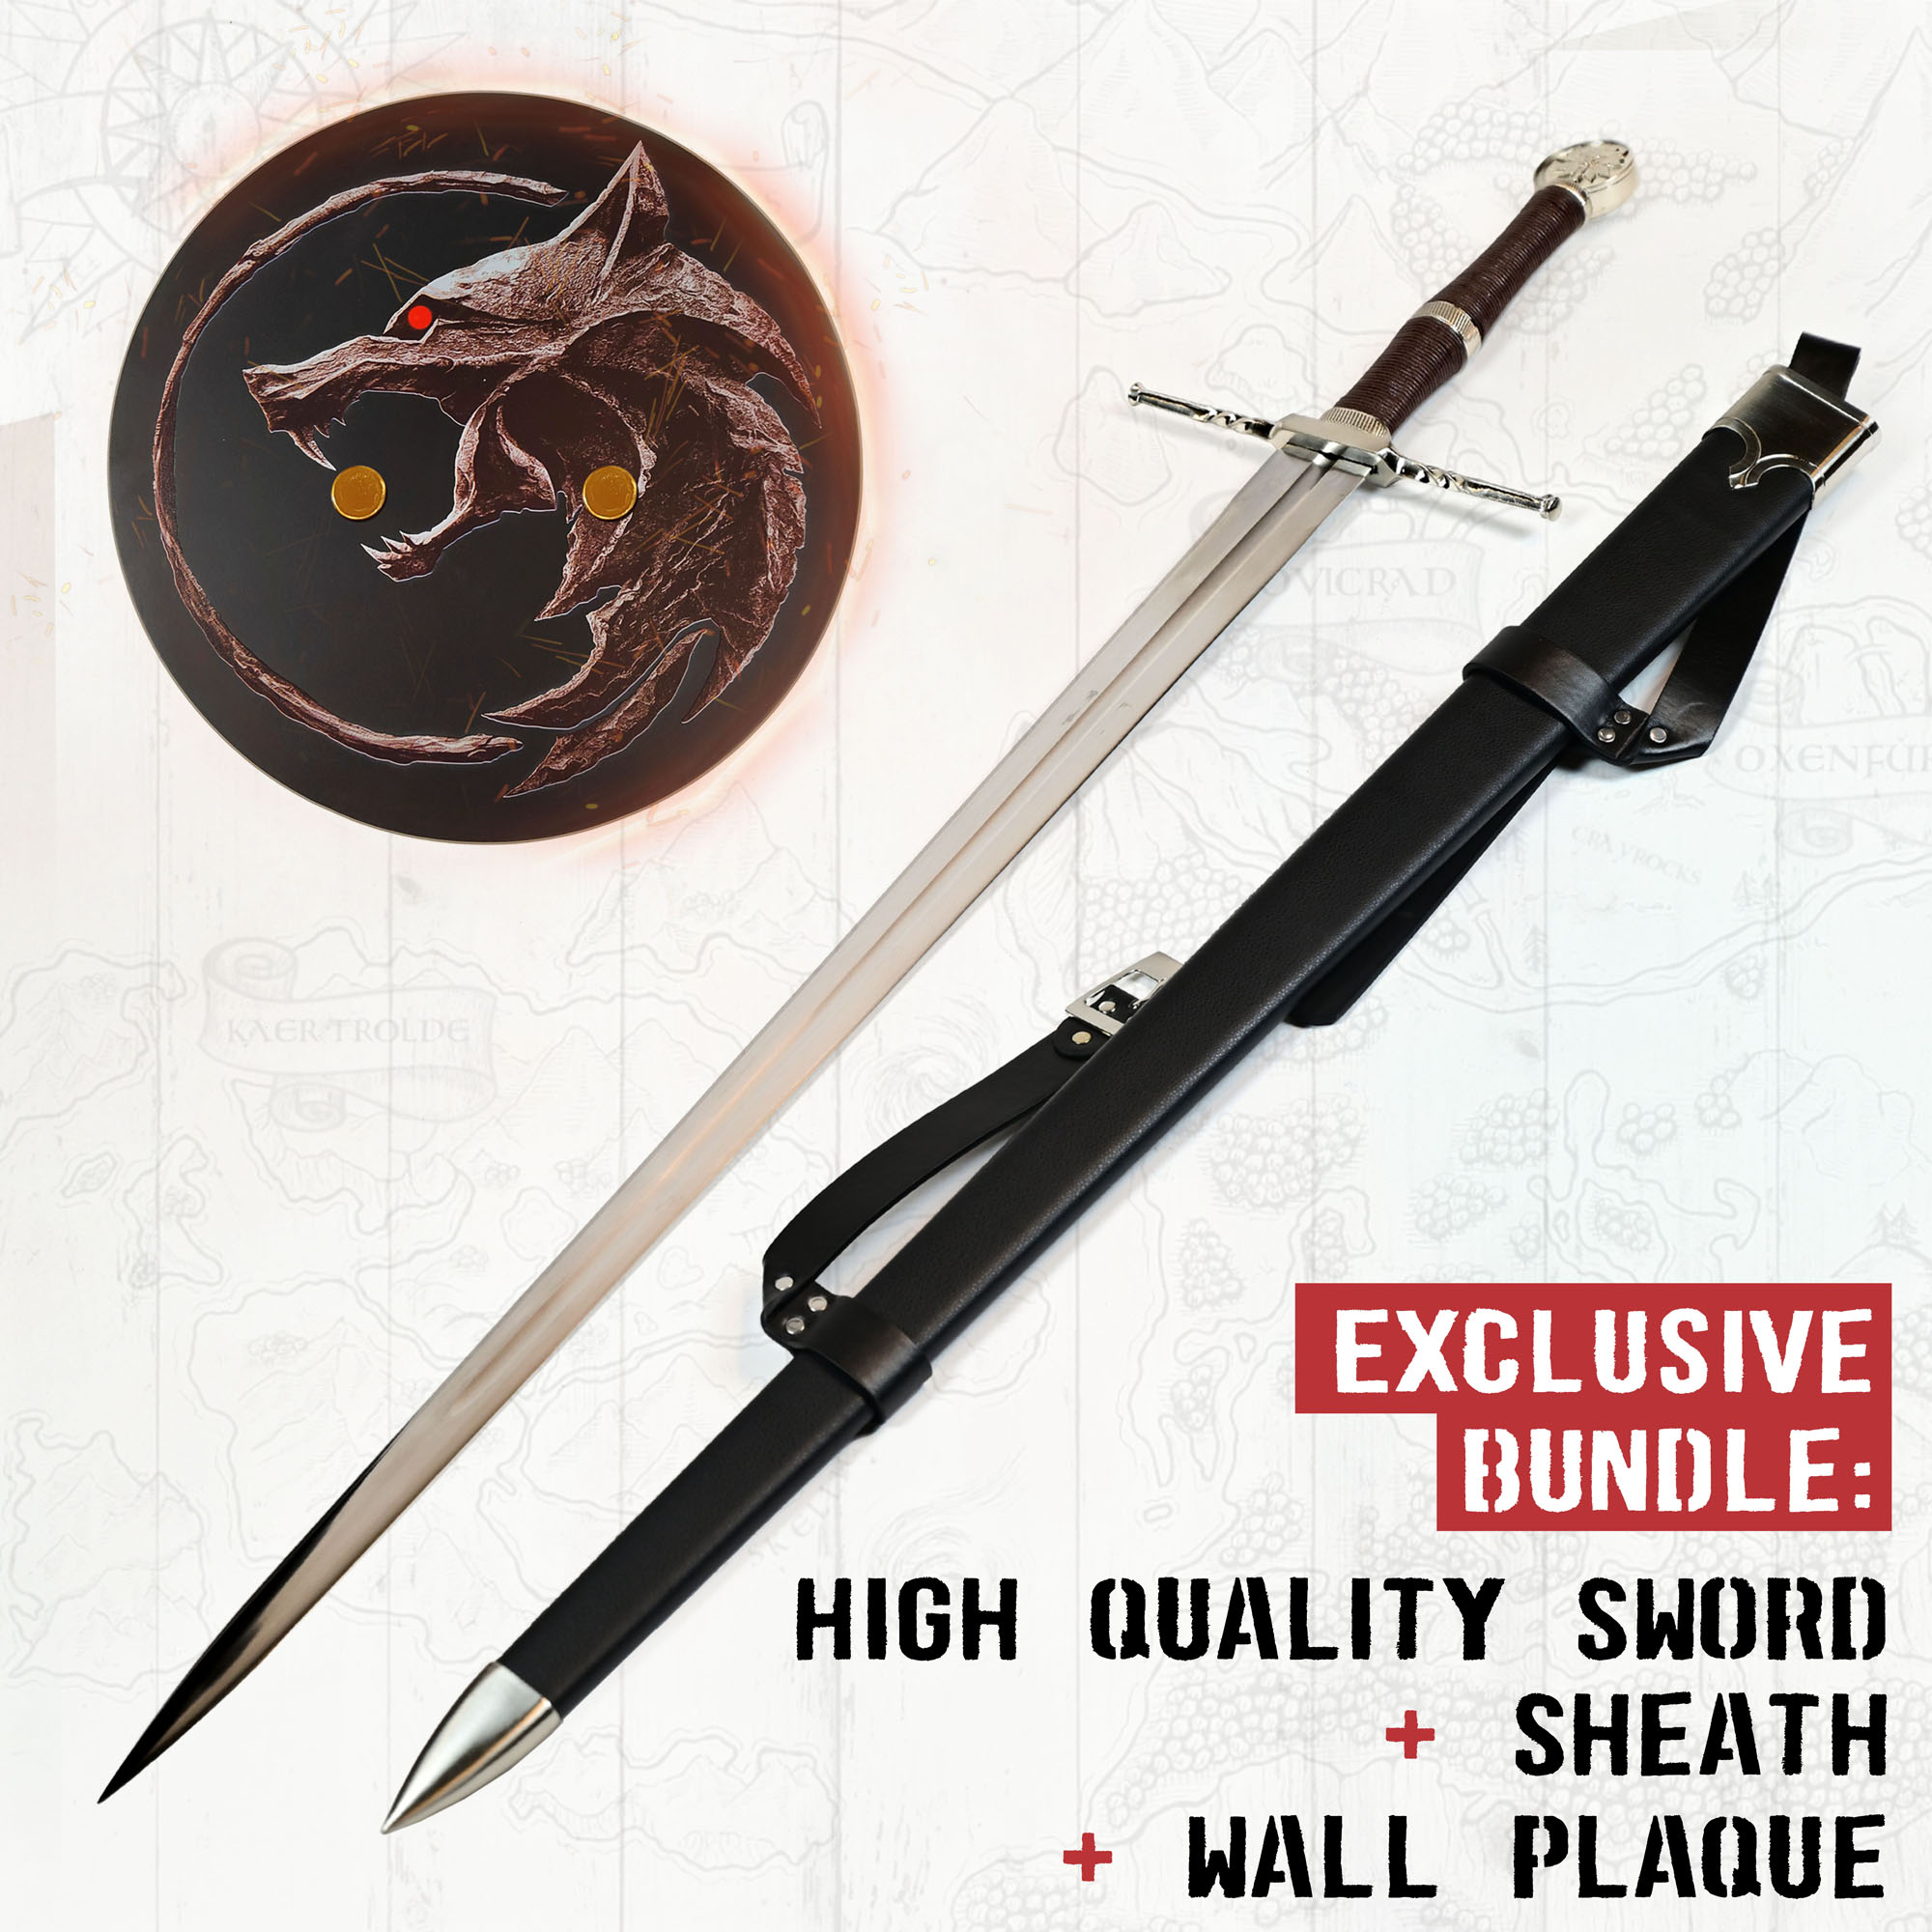 Witcher - Steel Sword with scabbard + Wall Plaque